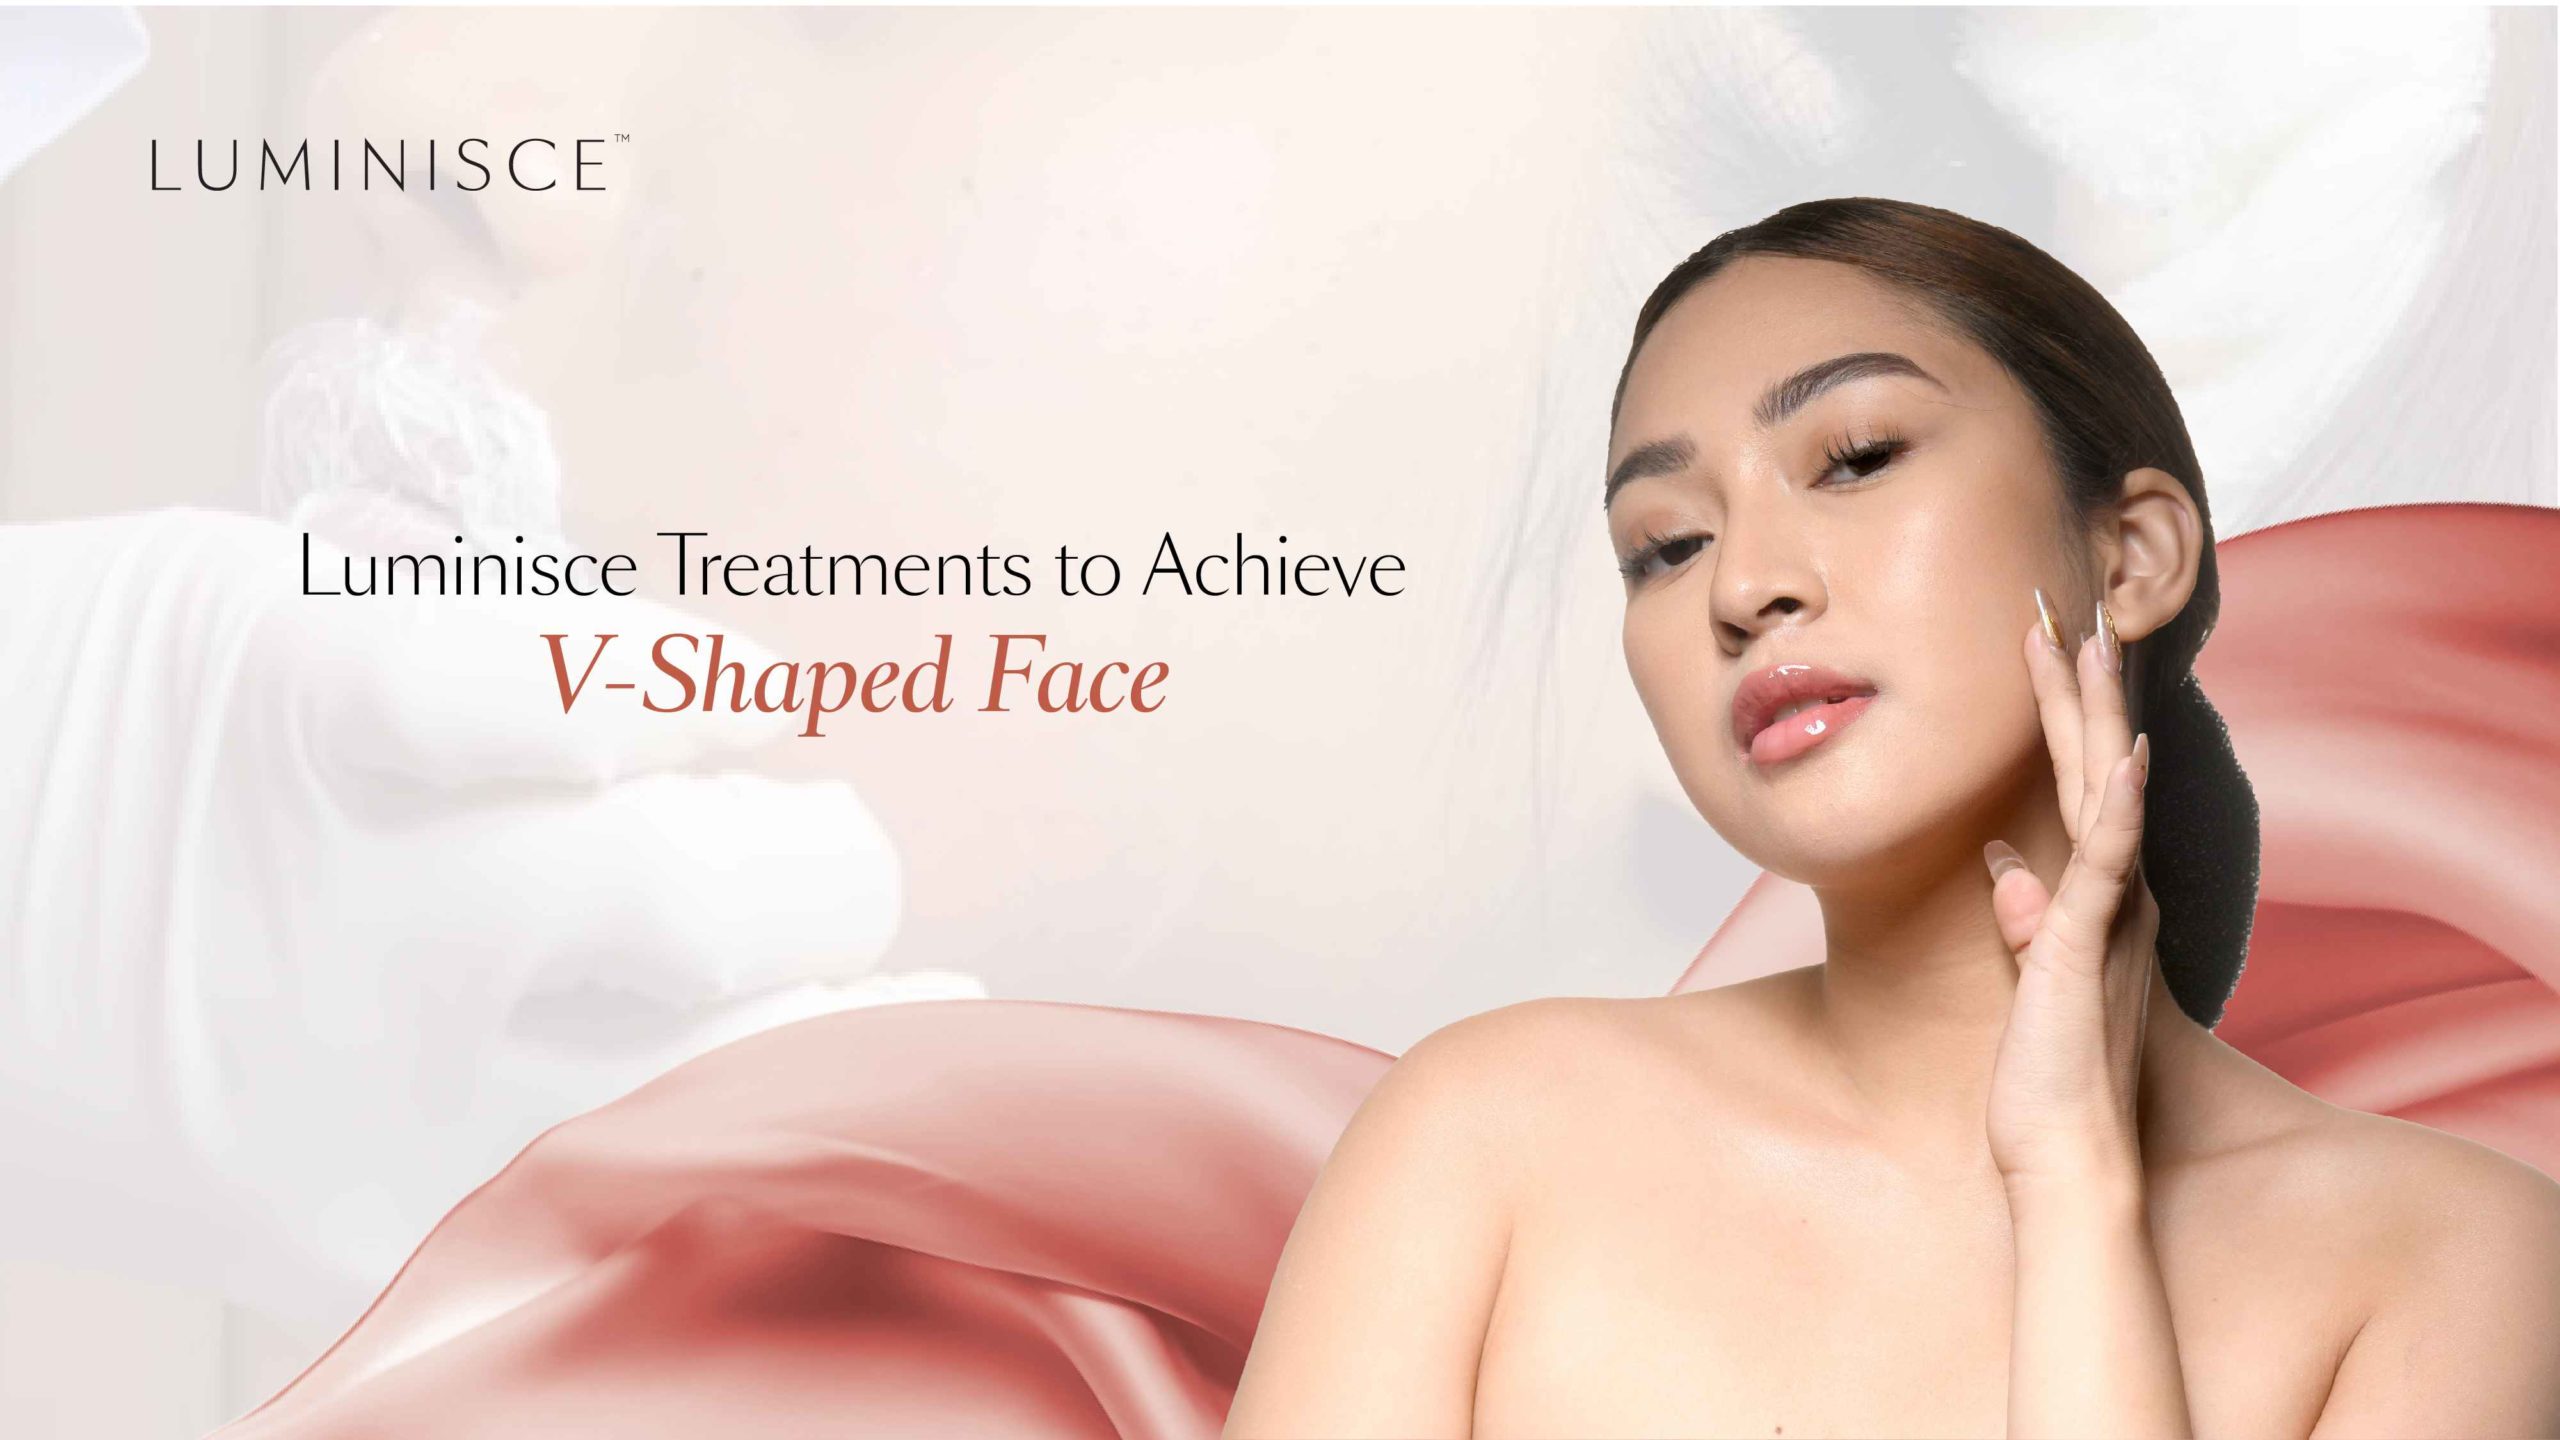 How to Achieve a V-Shaped Face at Luminisce